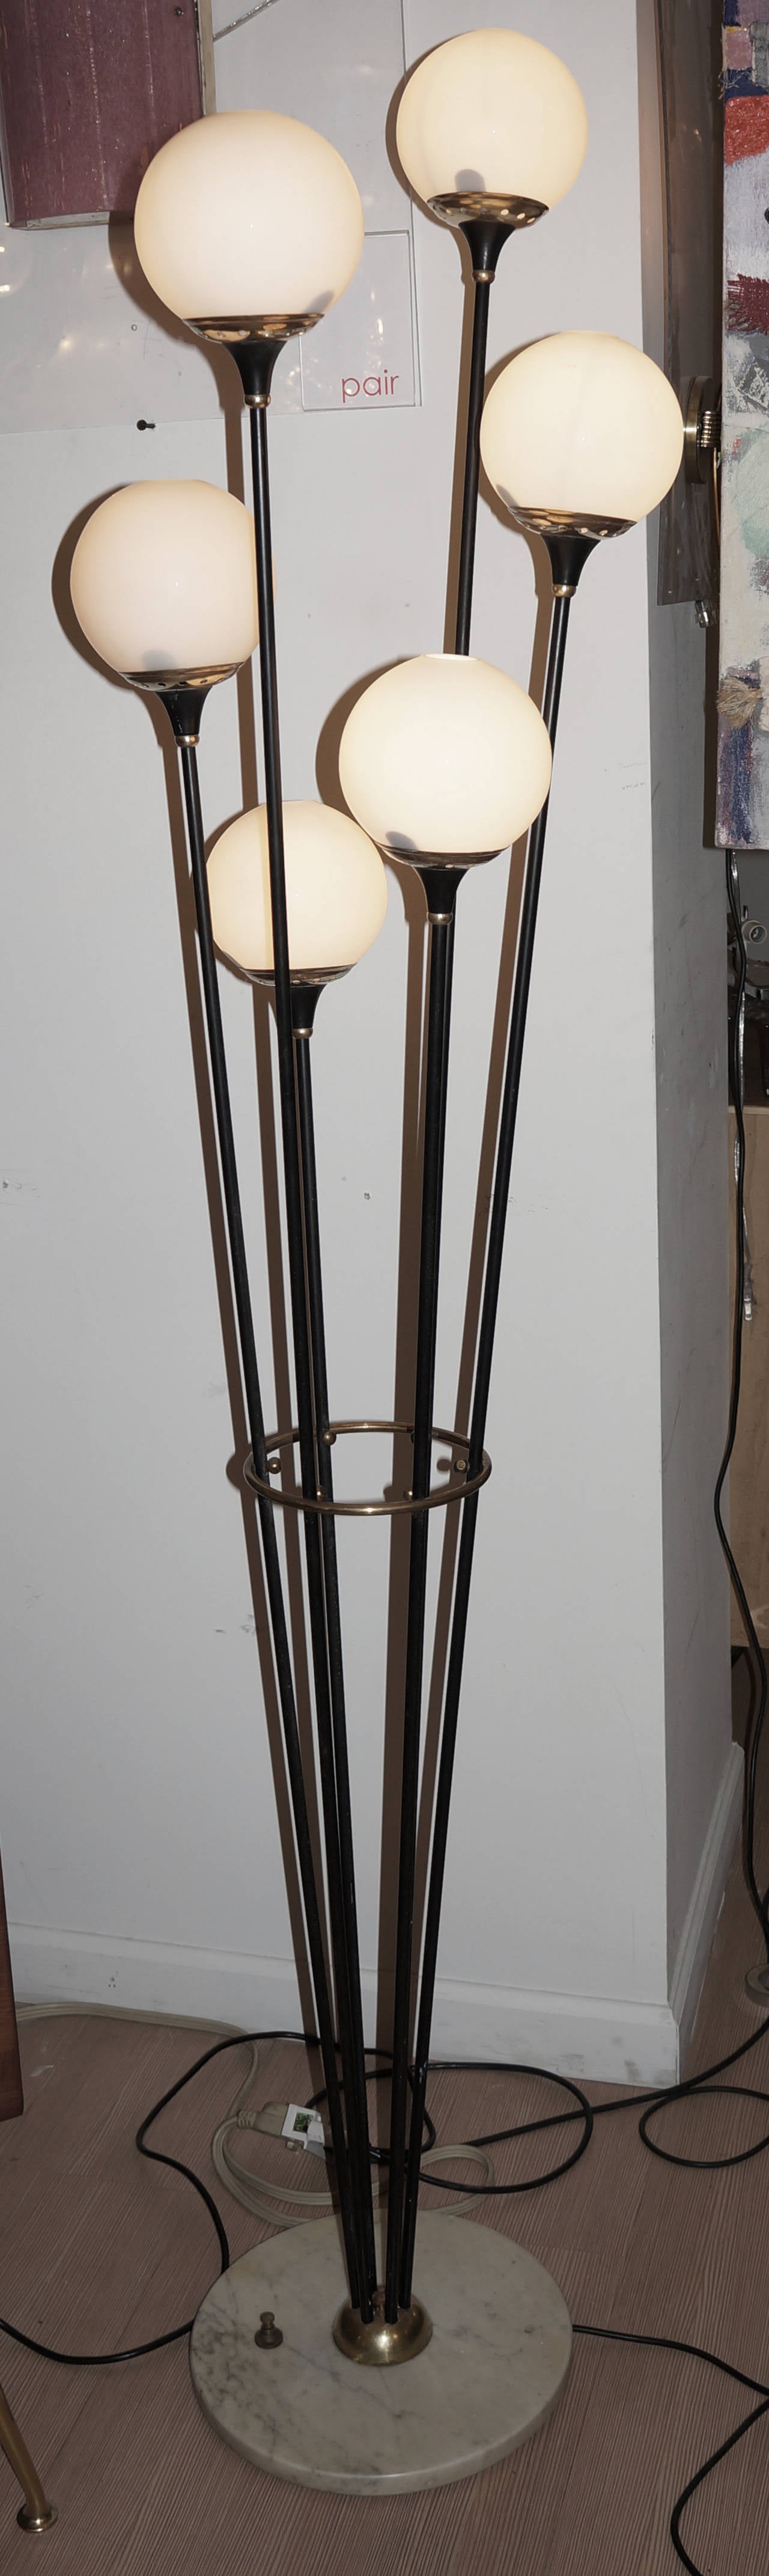 Sculptural floor lamp featuring six long stems with frosted glass globes departing from a gray marble base. This lamp is commonly attributed to Stilnovo. Stilnovo after enjoying success from the 1950s to the 1970s, was less effective in the